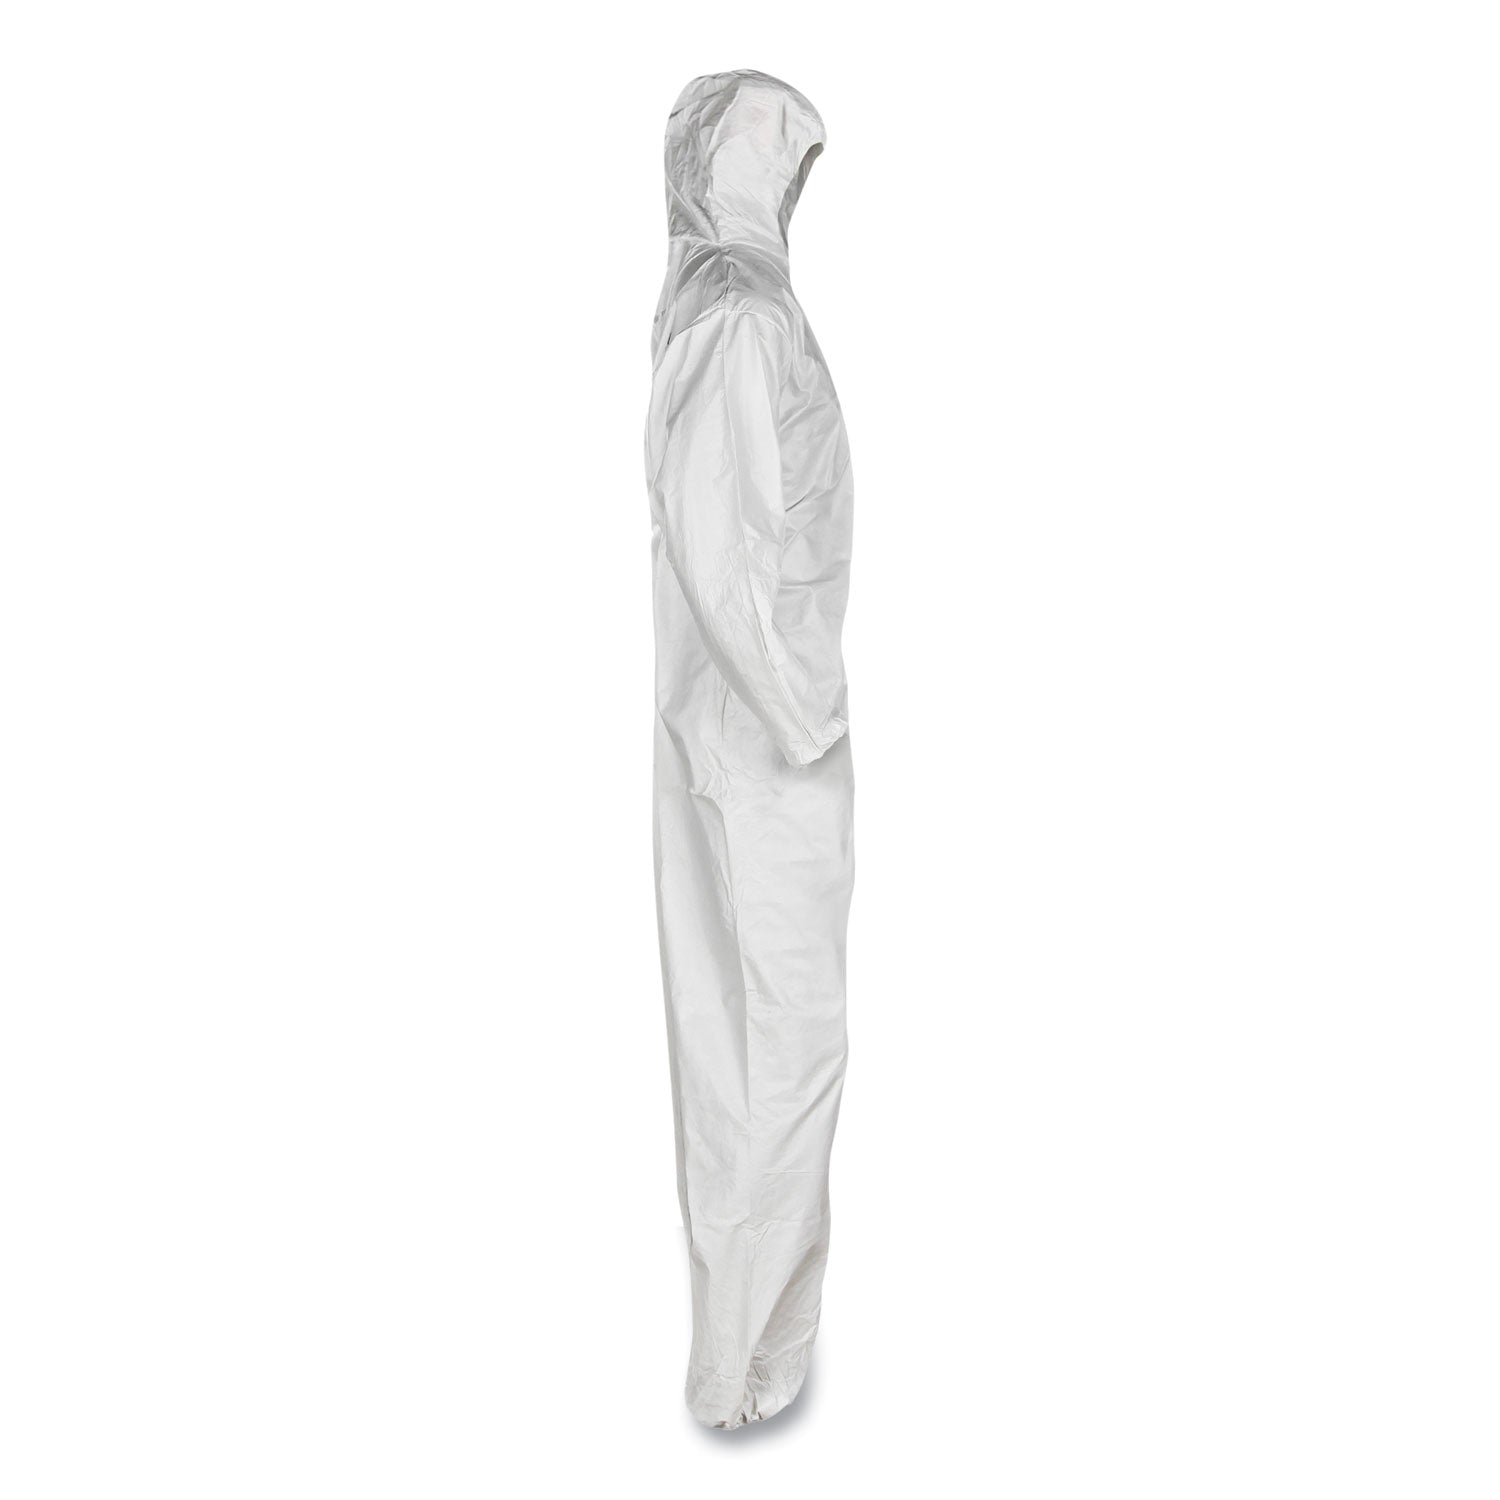 a20-breathable-particle-protection-coveralls-elastic-back-hood-medium-white-24-carton_kcc49112 - 3